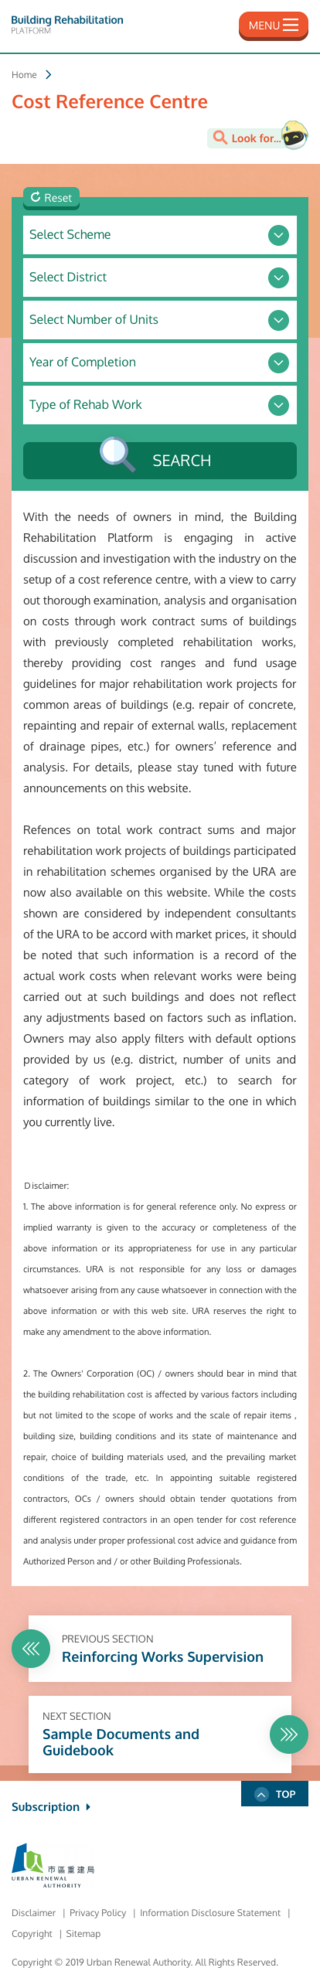 Urban Renewal Authority website screenshot for mobile version 3 of 4